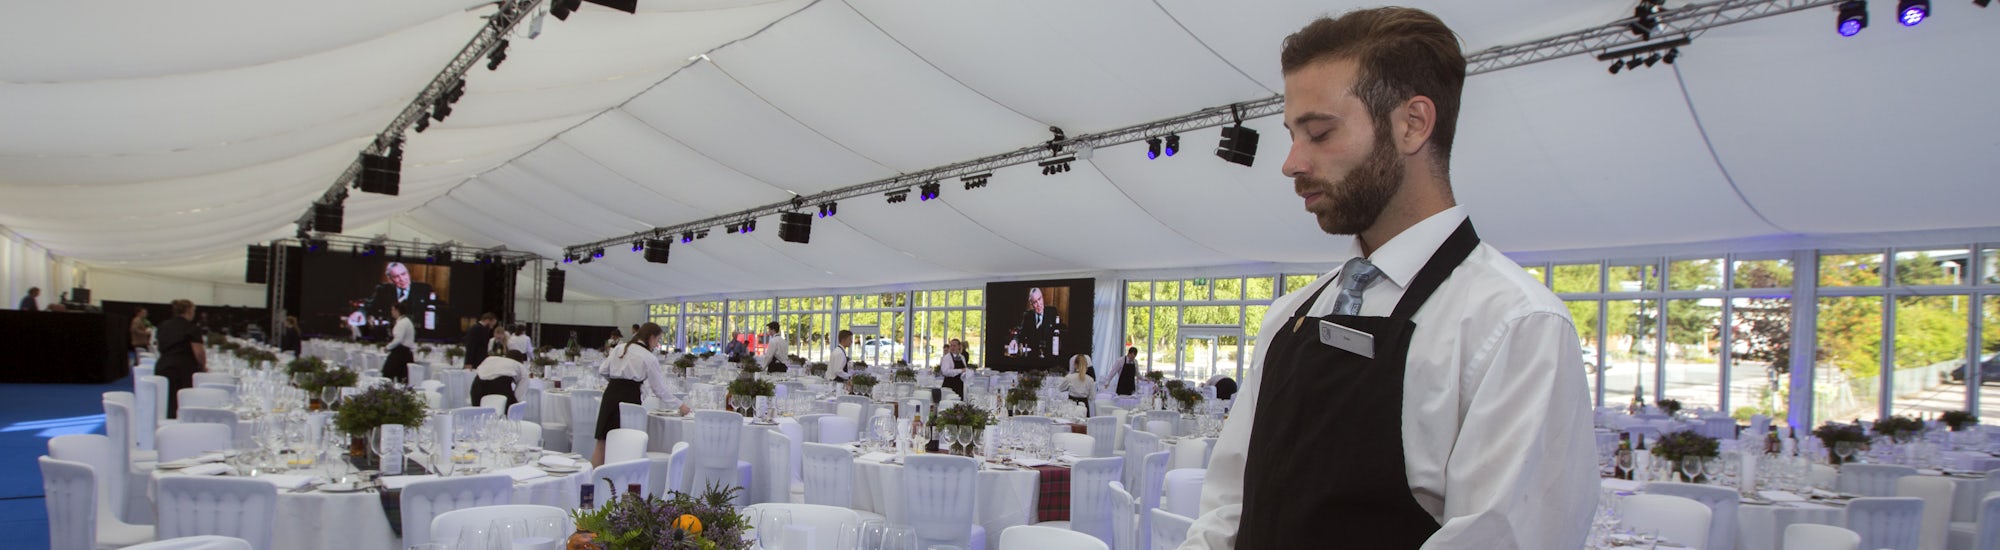 Conference Tent at Aveimore